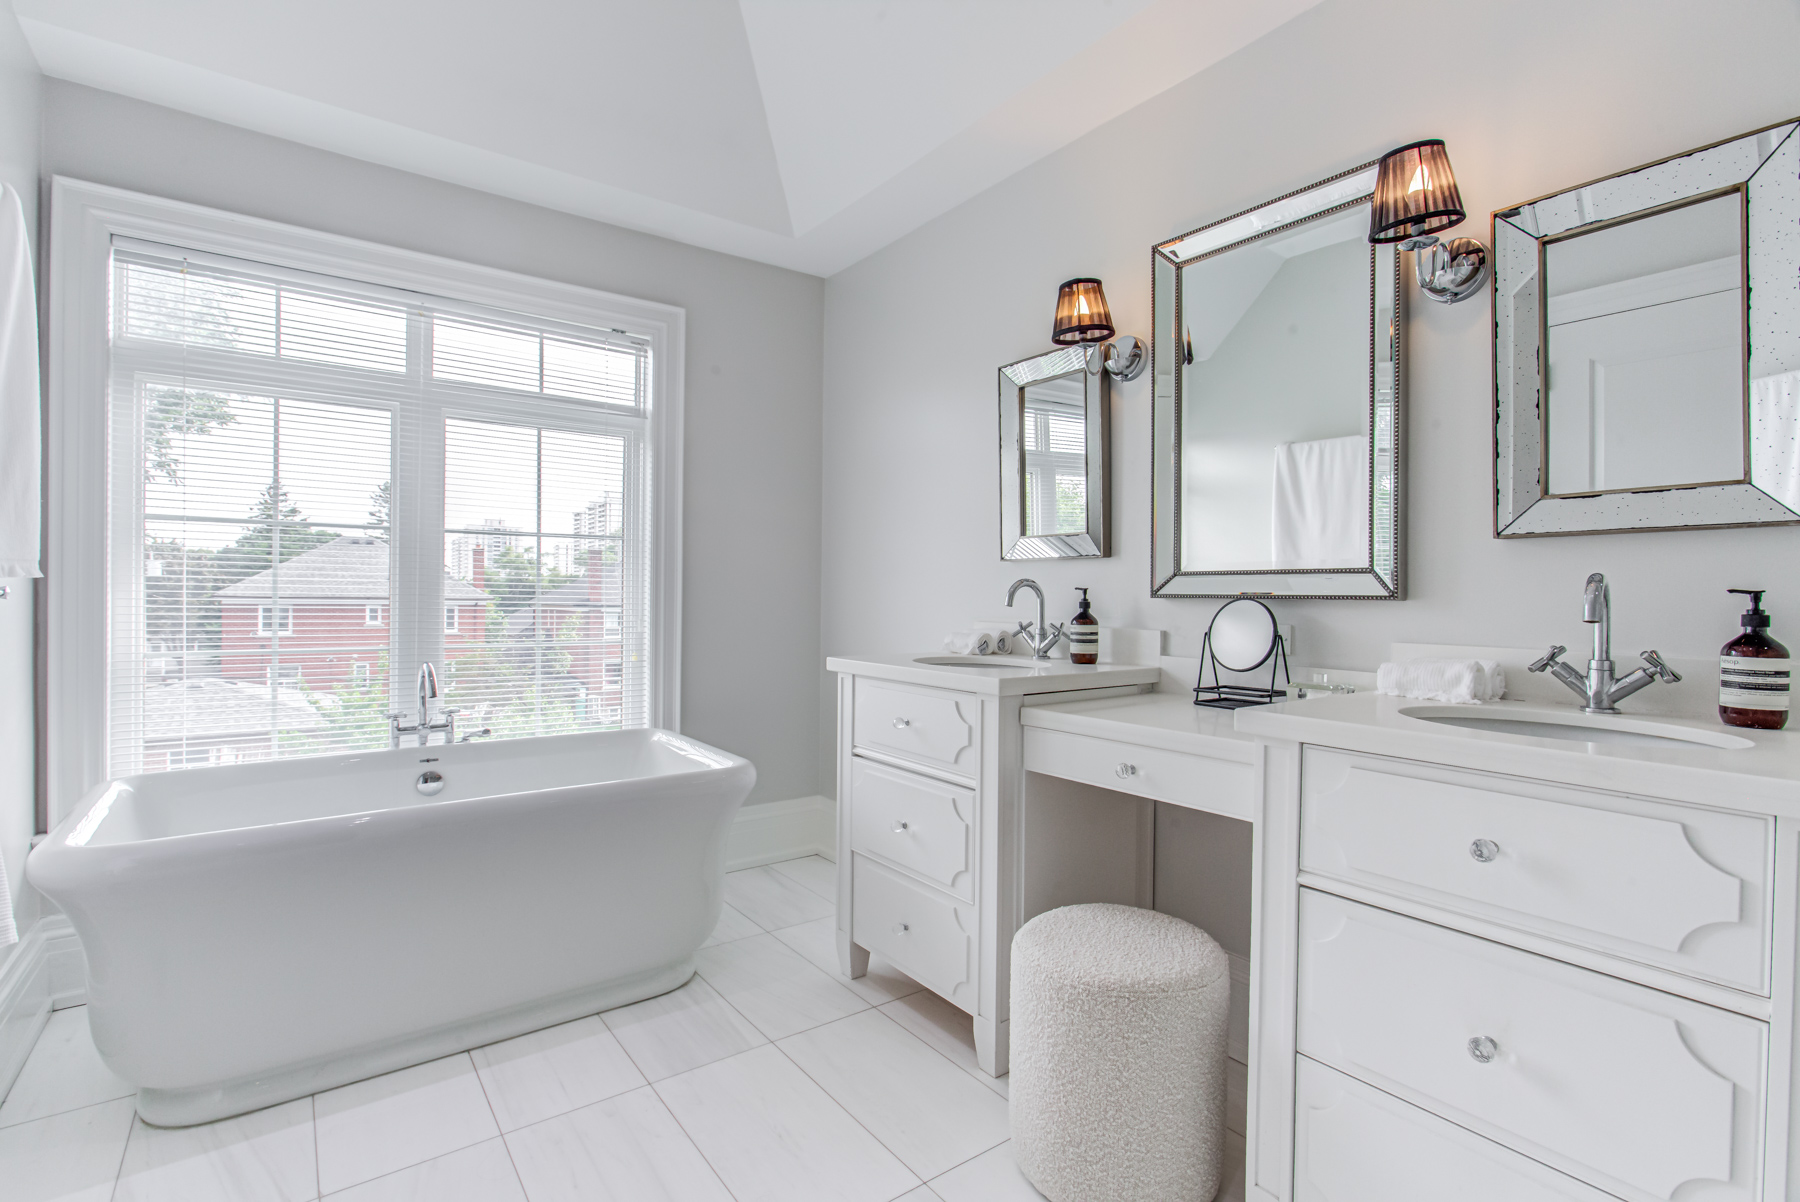 Beautiful 6-piece bath with large vanity and freestanding soaker tub.